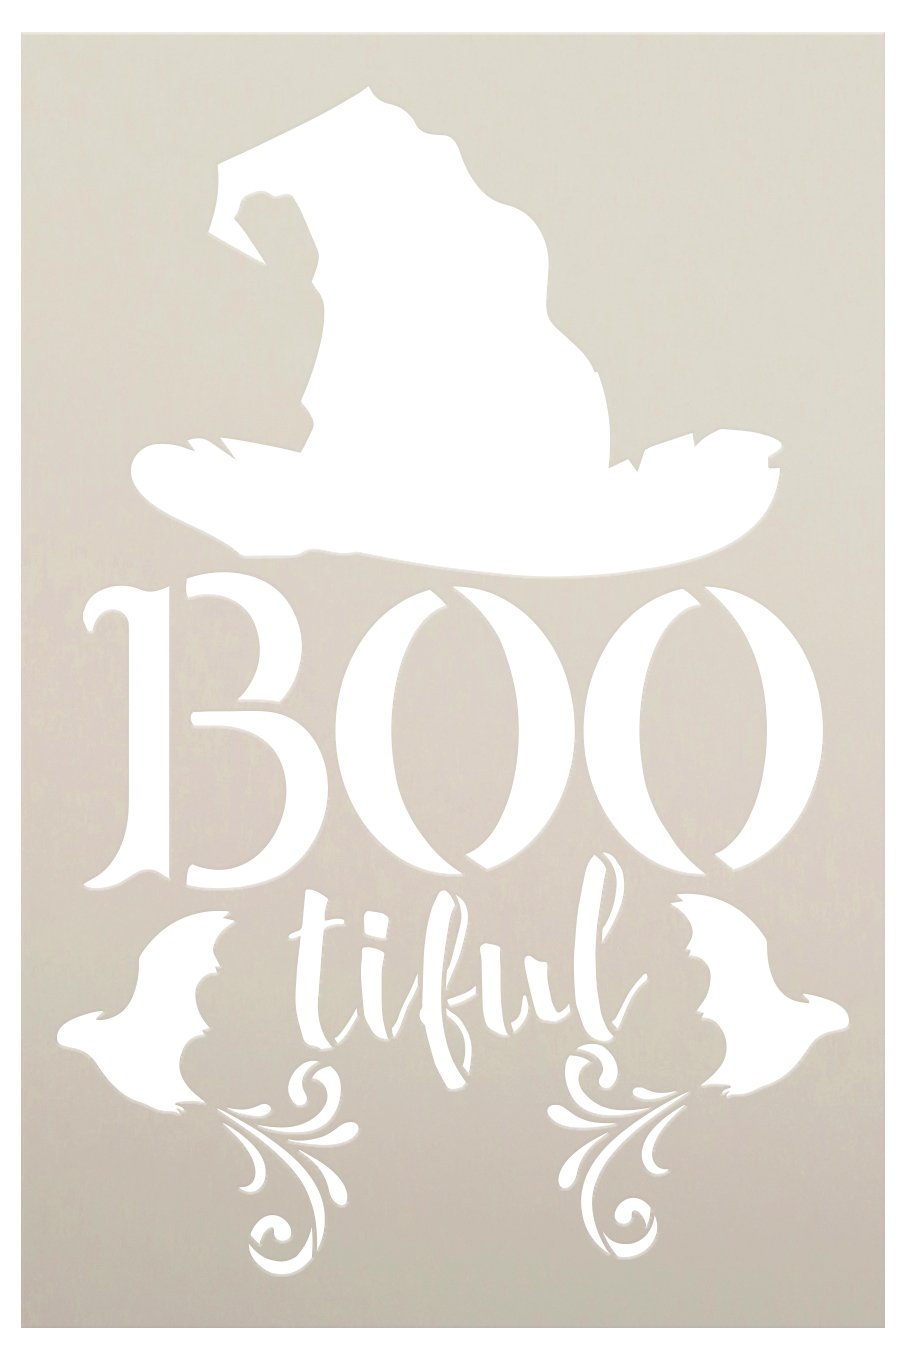 BOOtiful Stencil by StudioR12 | Witch Hat - Bats | DIY Fall Halloween Home Decor | Craft & Paint Wood Sign | Reusable Mylar Template | Select Size